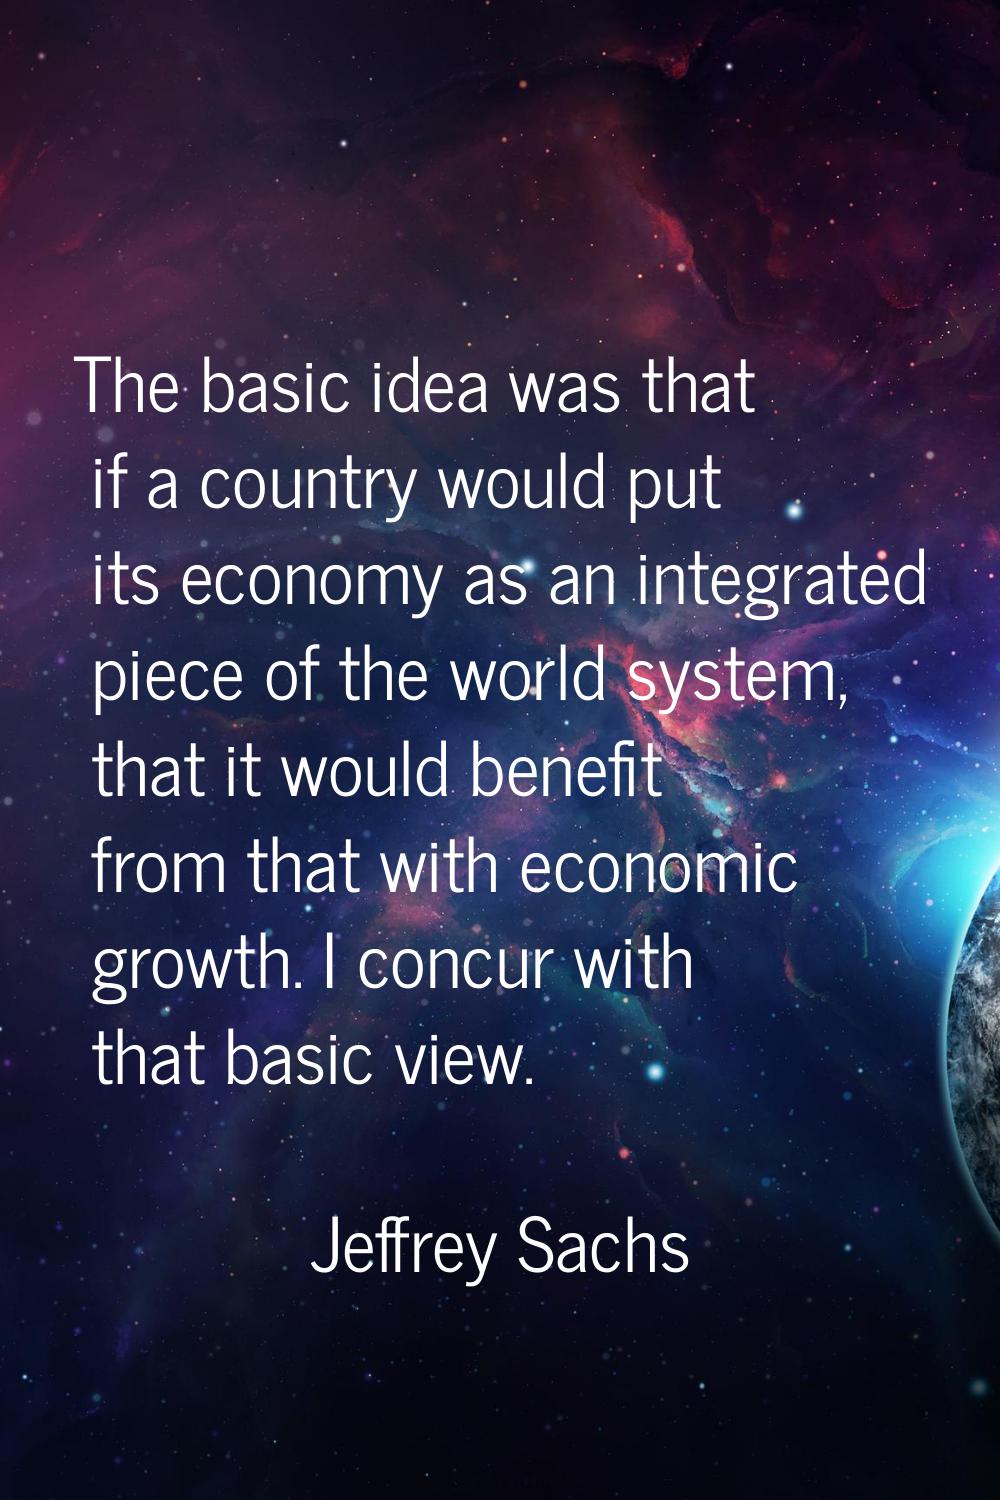 The basic idea was that if a country would put its economy as an integrated piece of the world syst